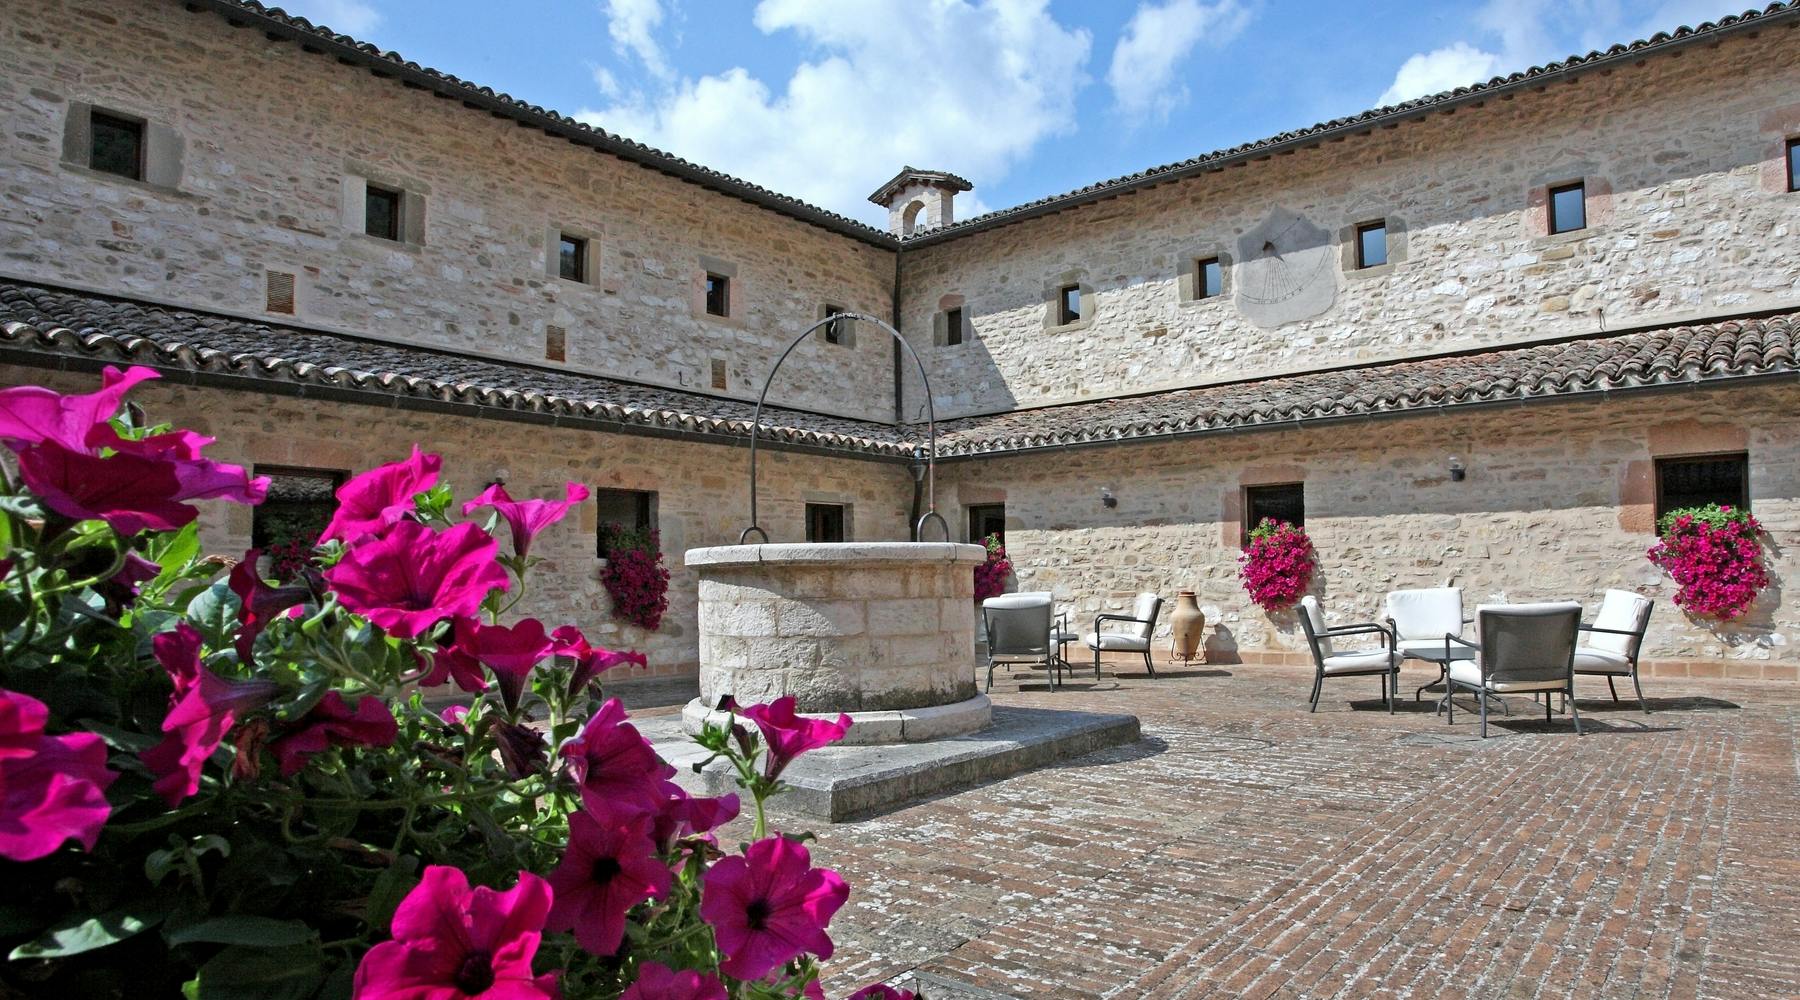 chiostro with flowers